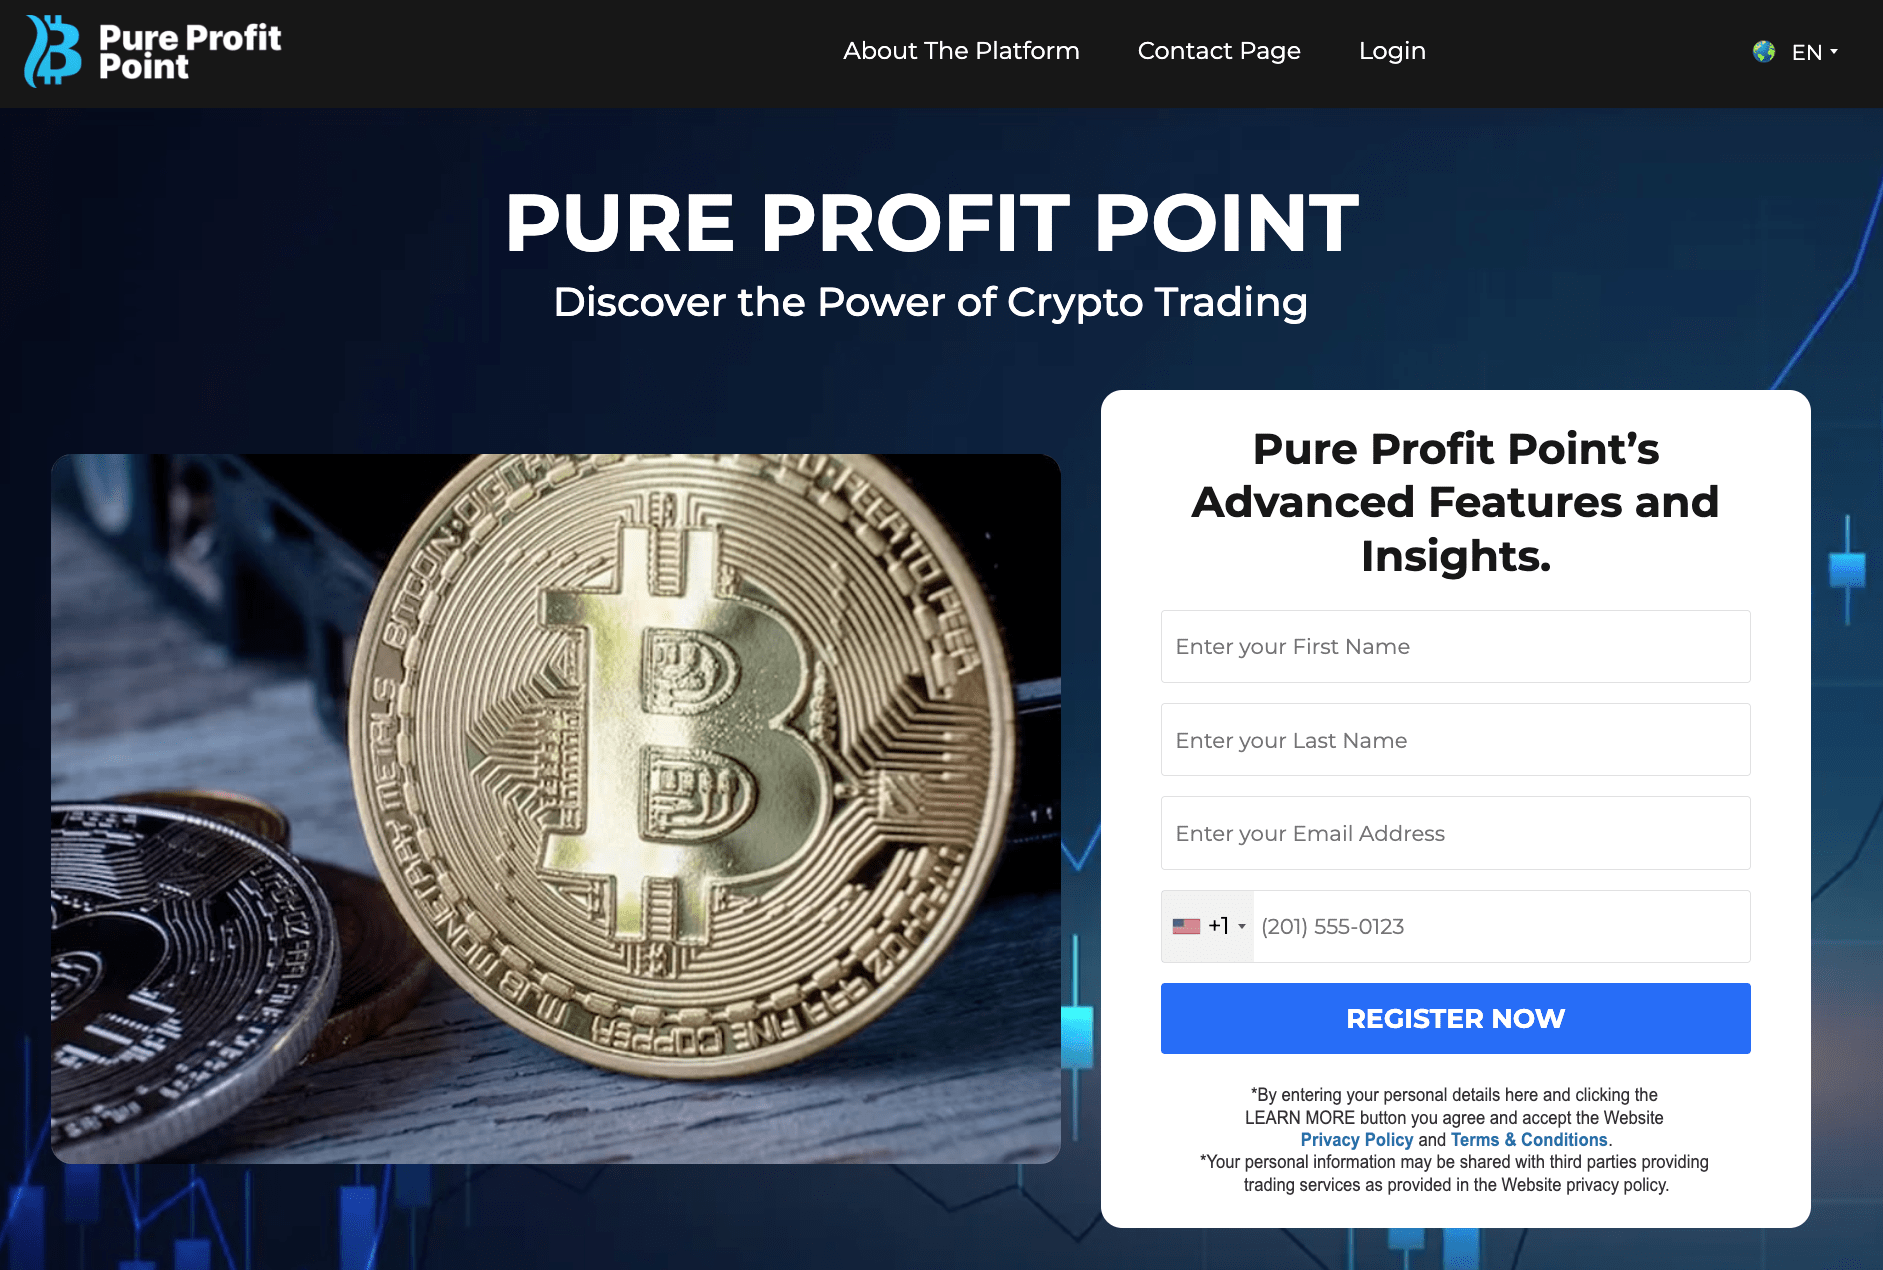 How To Make Your Product Stand Out With Bitcoin Trade Robot in 2021